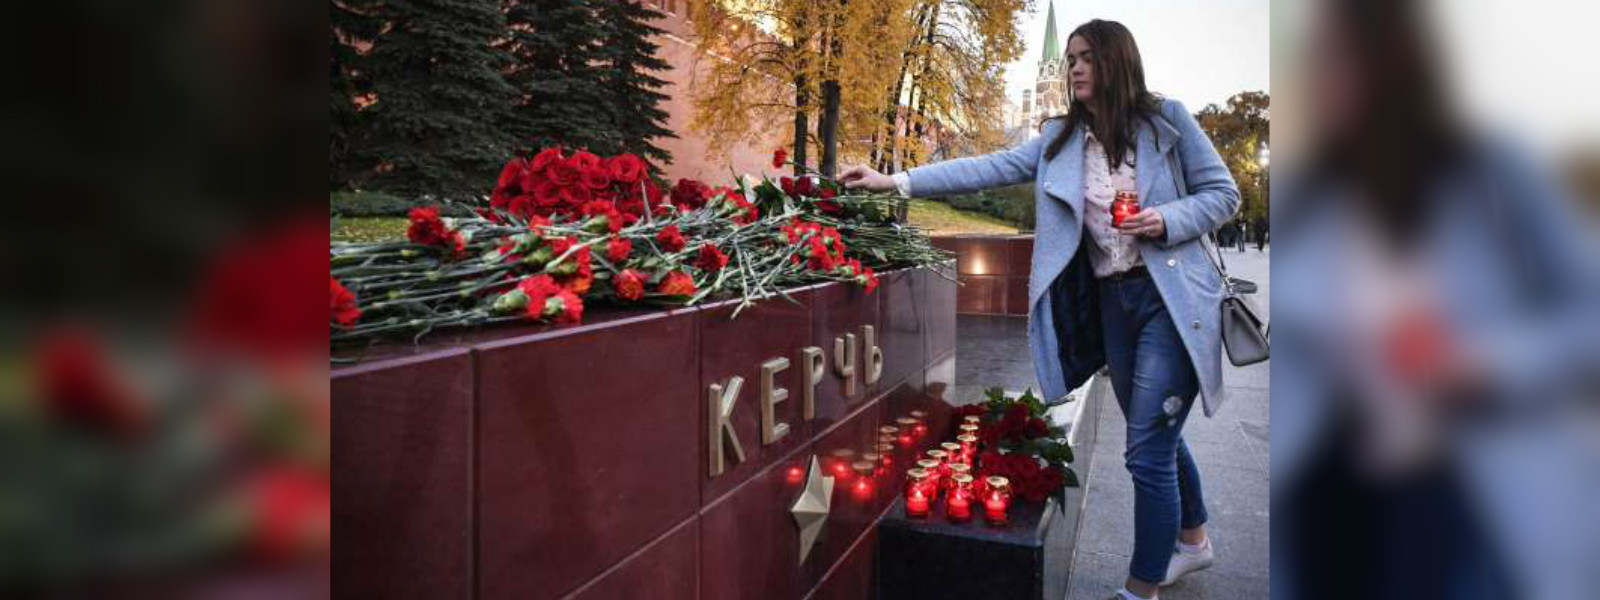 Flowers, candles for victims of Crimea attack